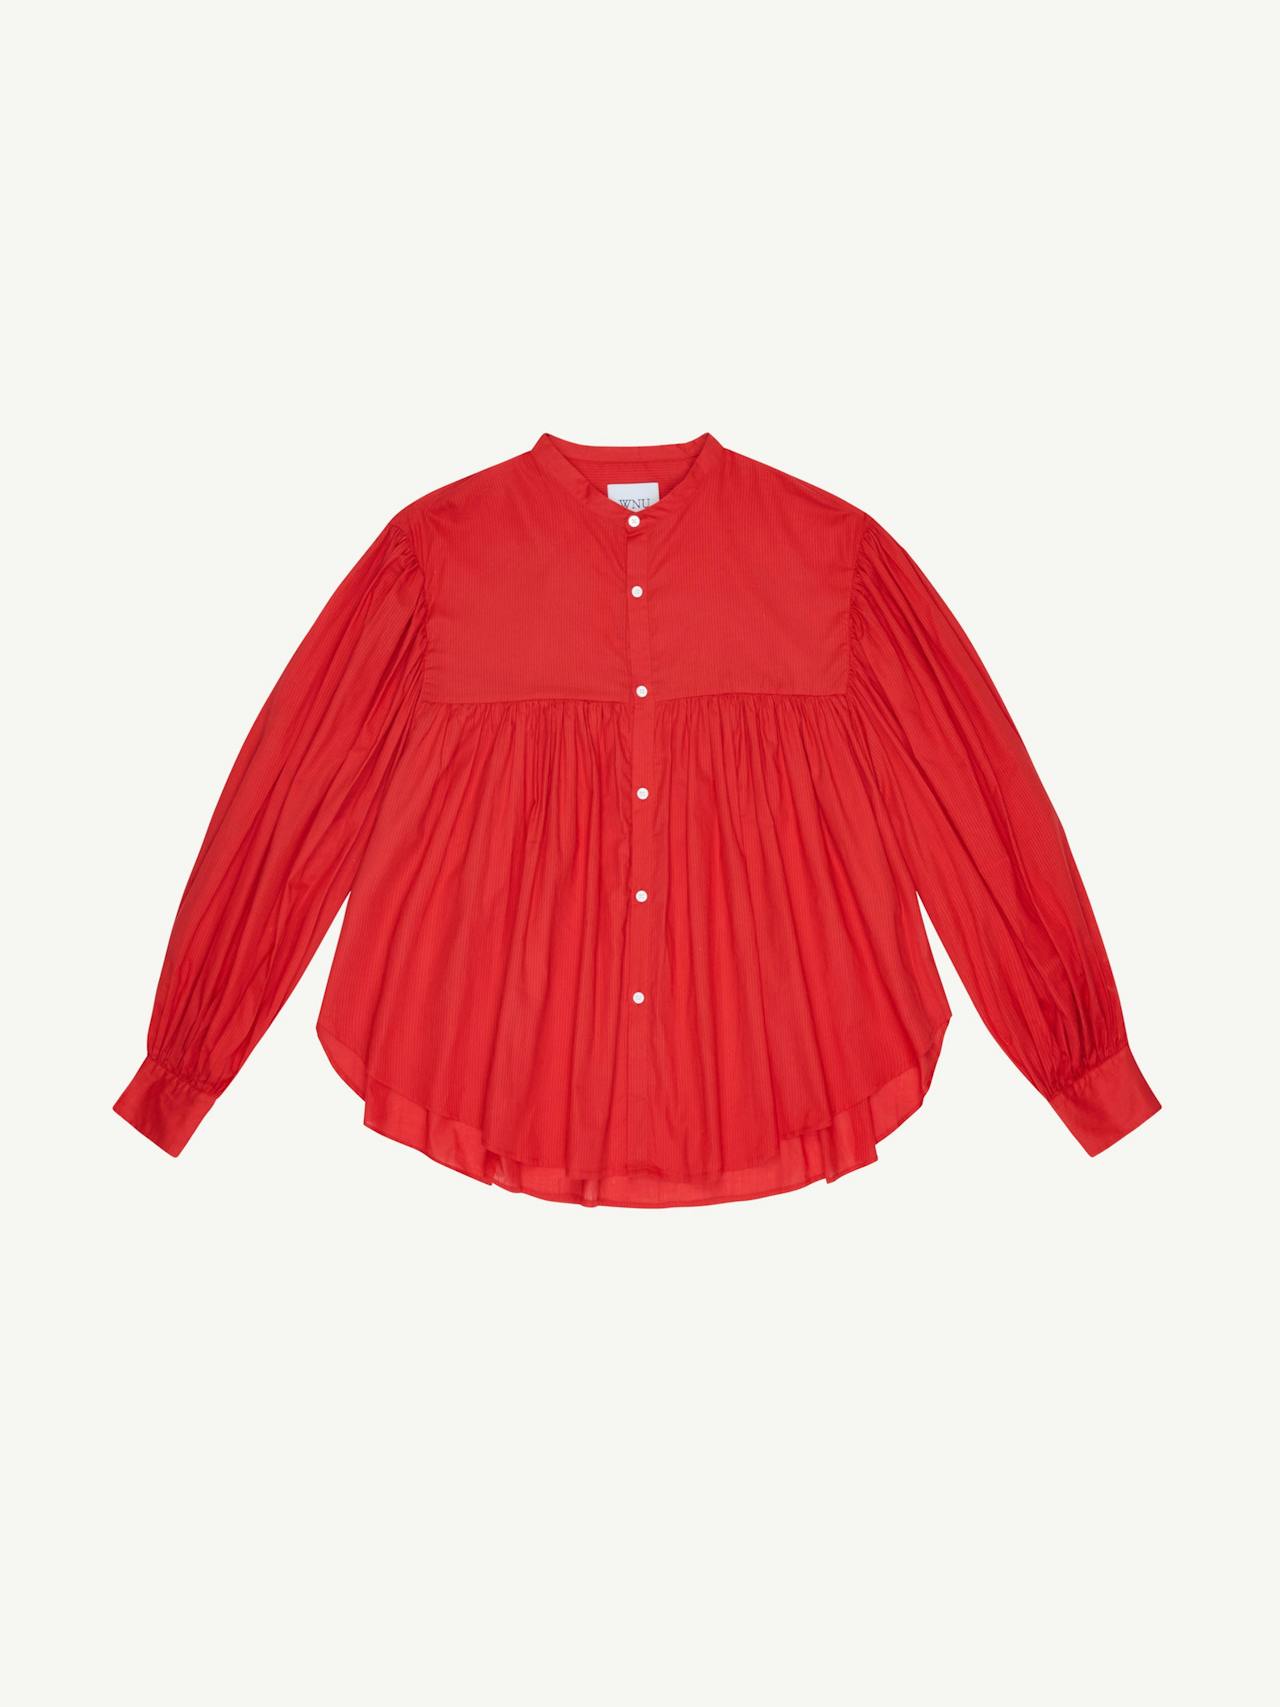 The Daphne shirt in cotton voile, red